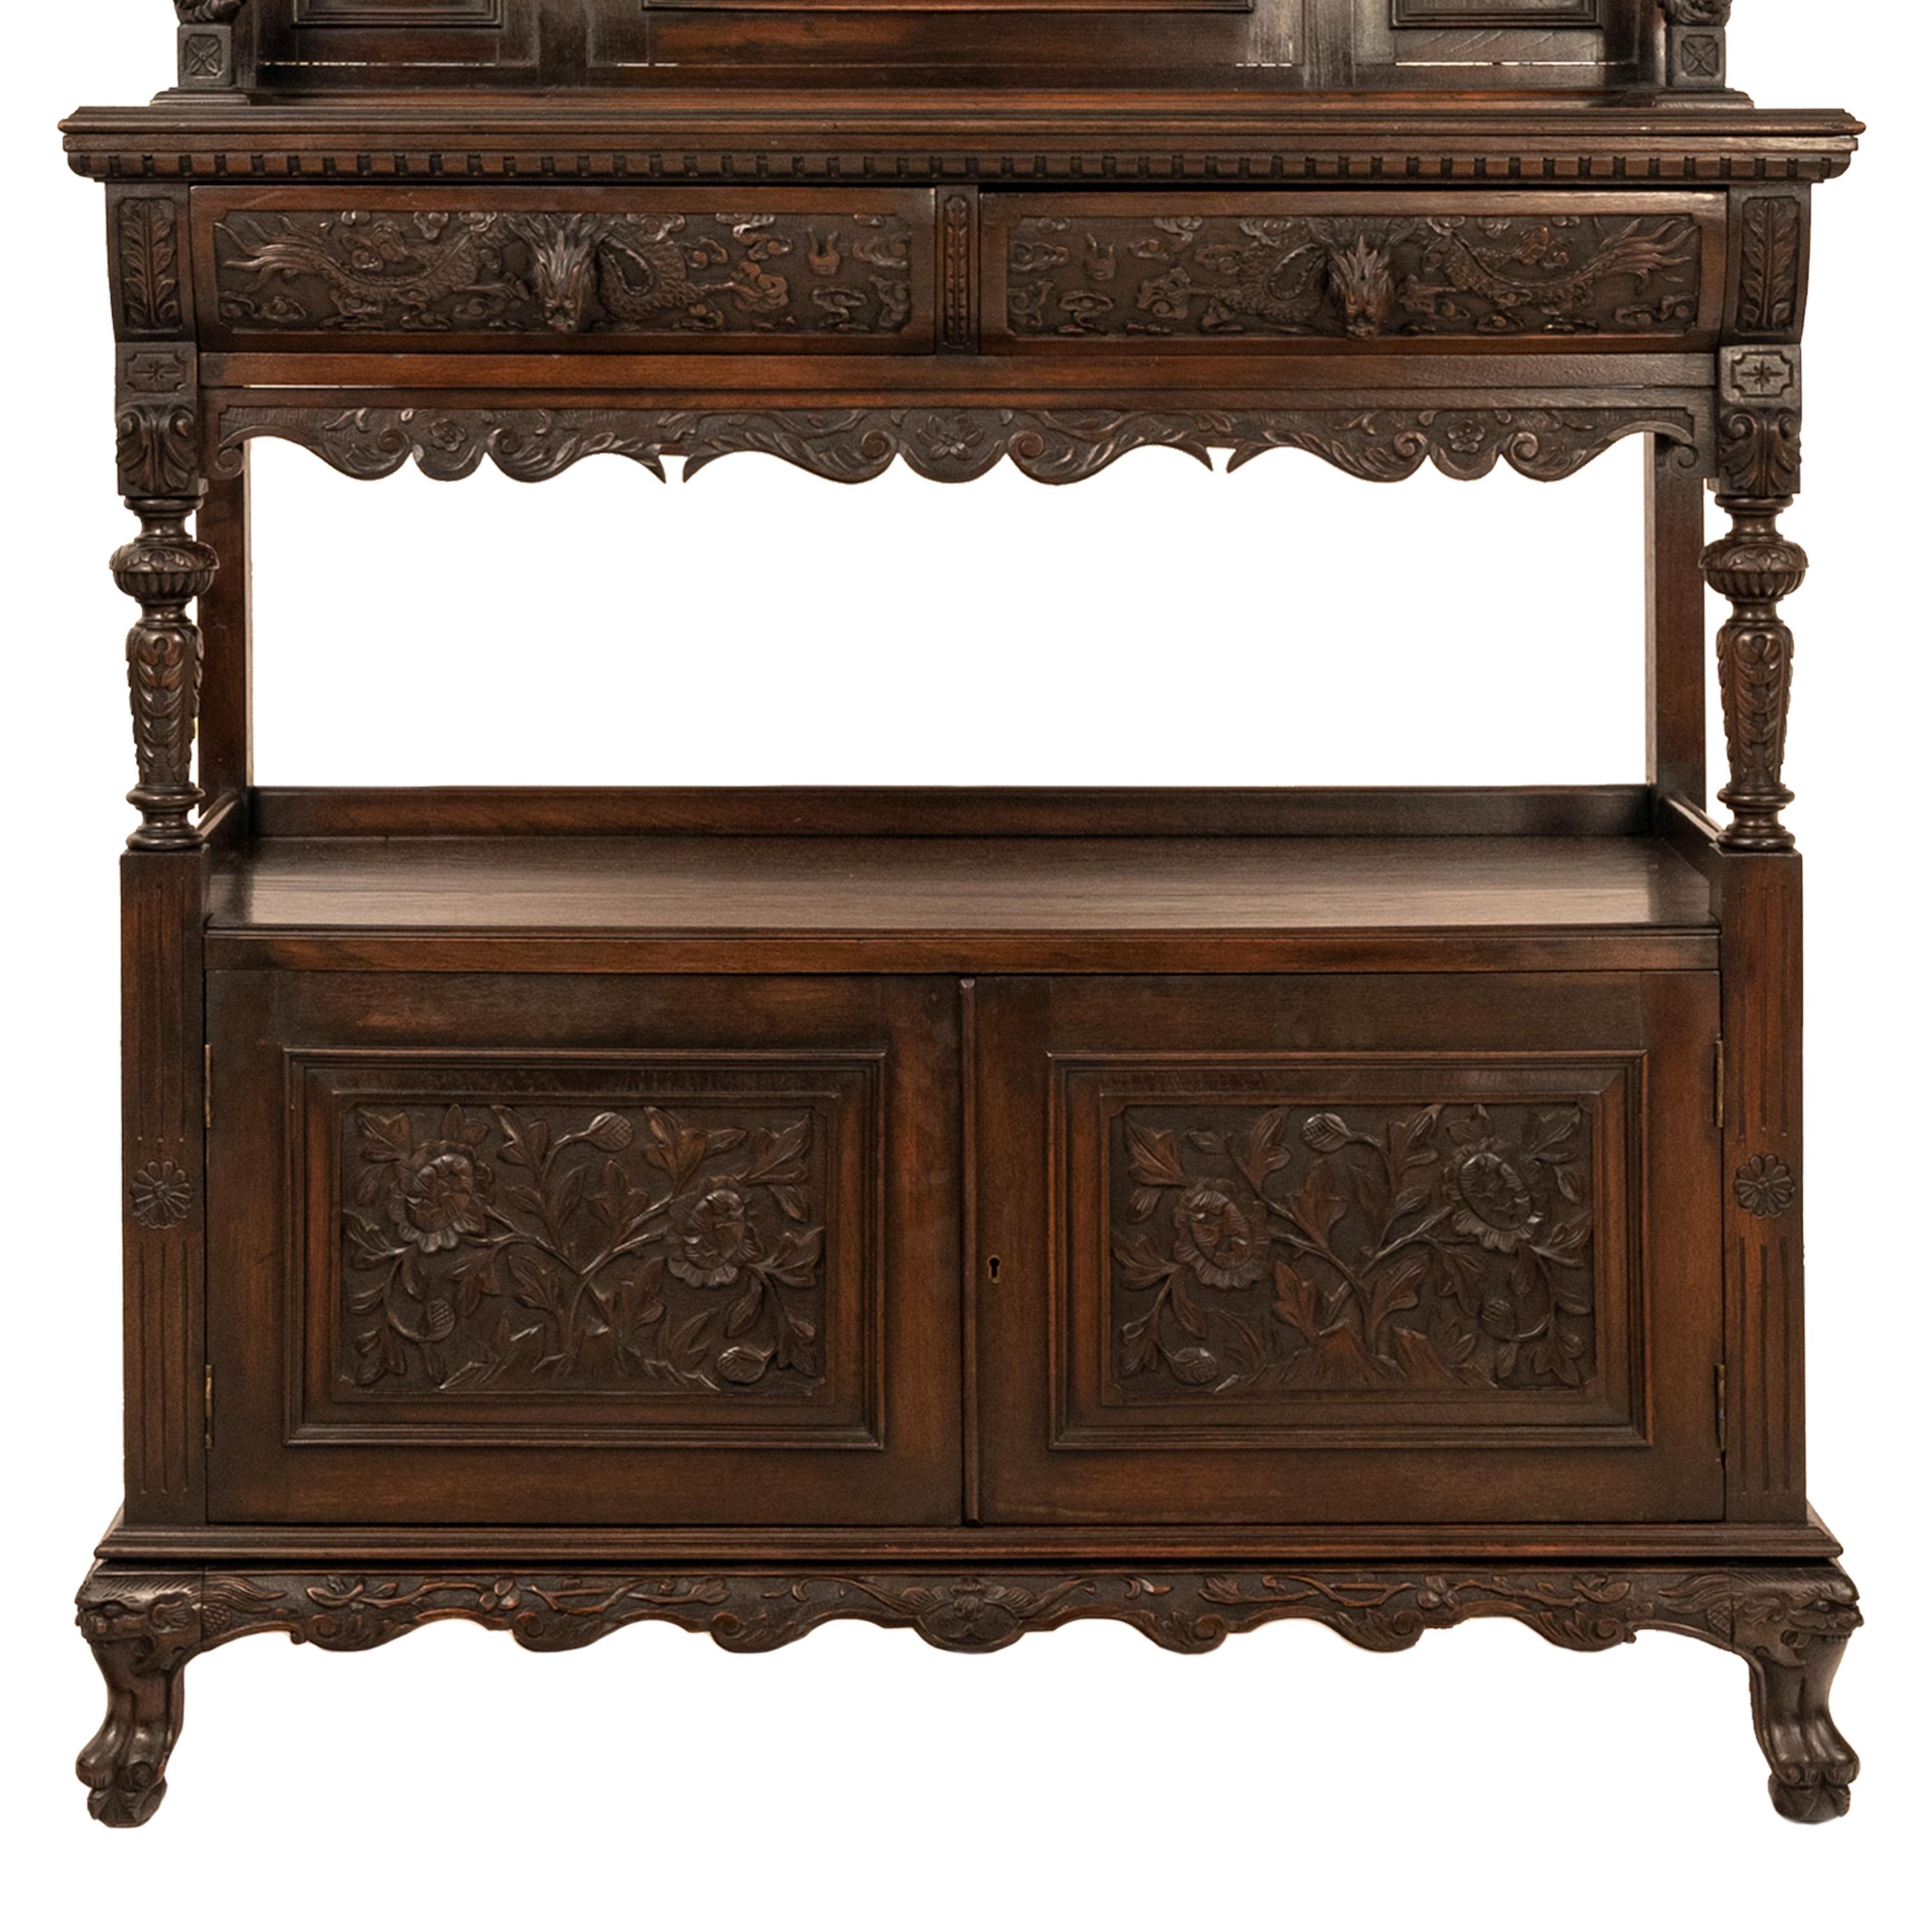 Mahogany Antique French Carved Etagere Buffet Sideboard Chinoiserie Japanoise Style, 1875 For Sale